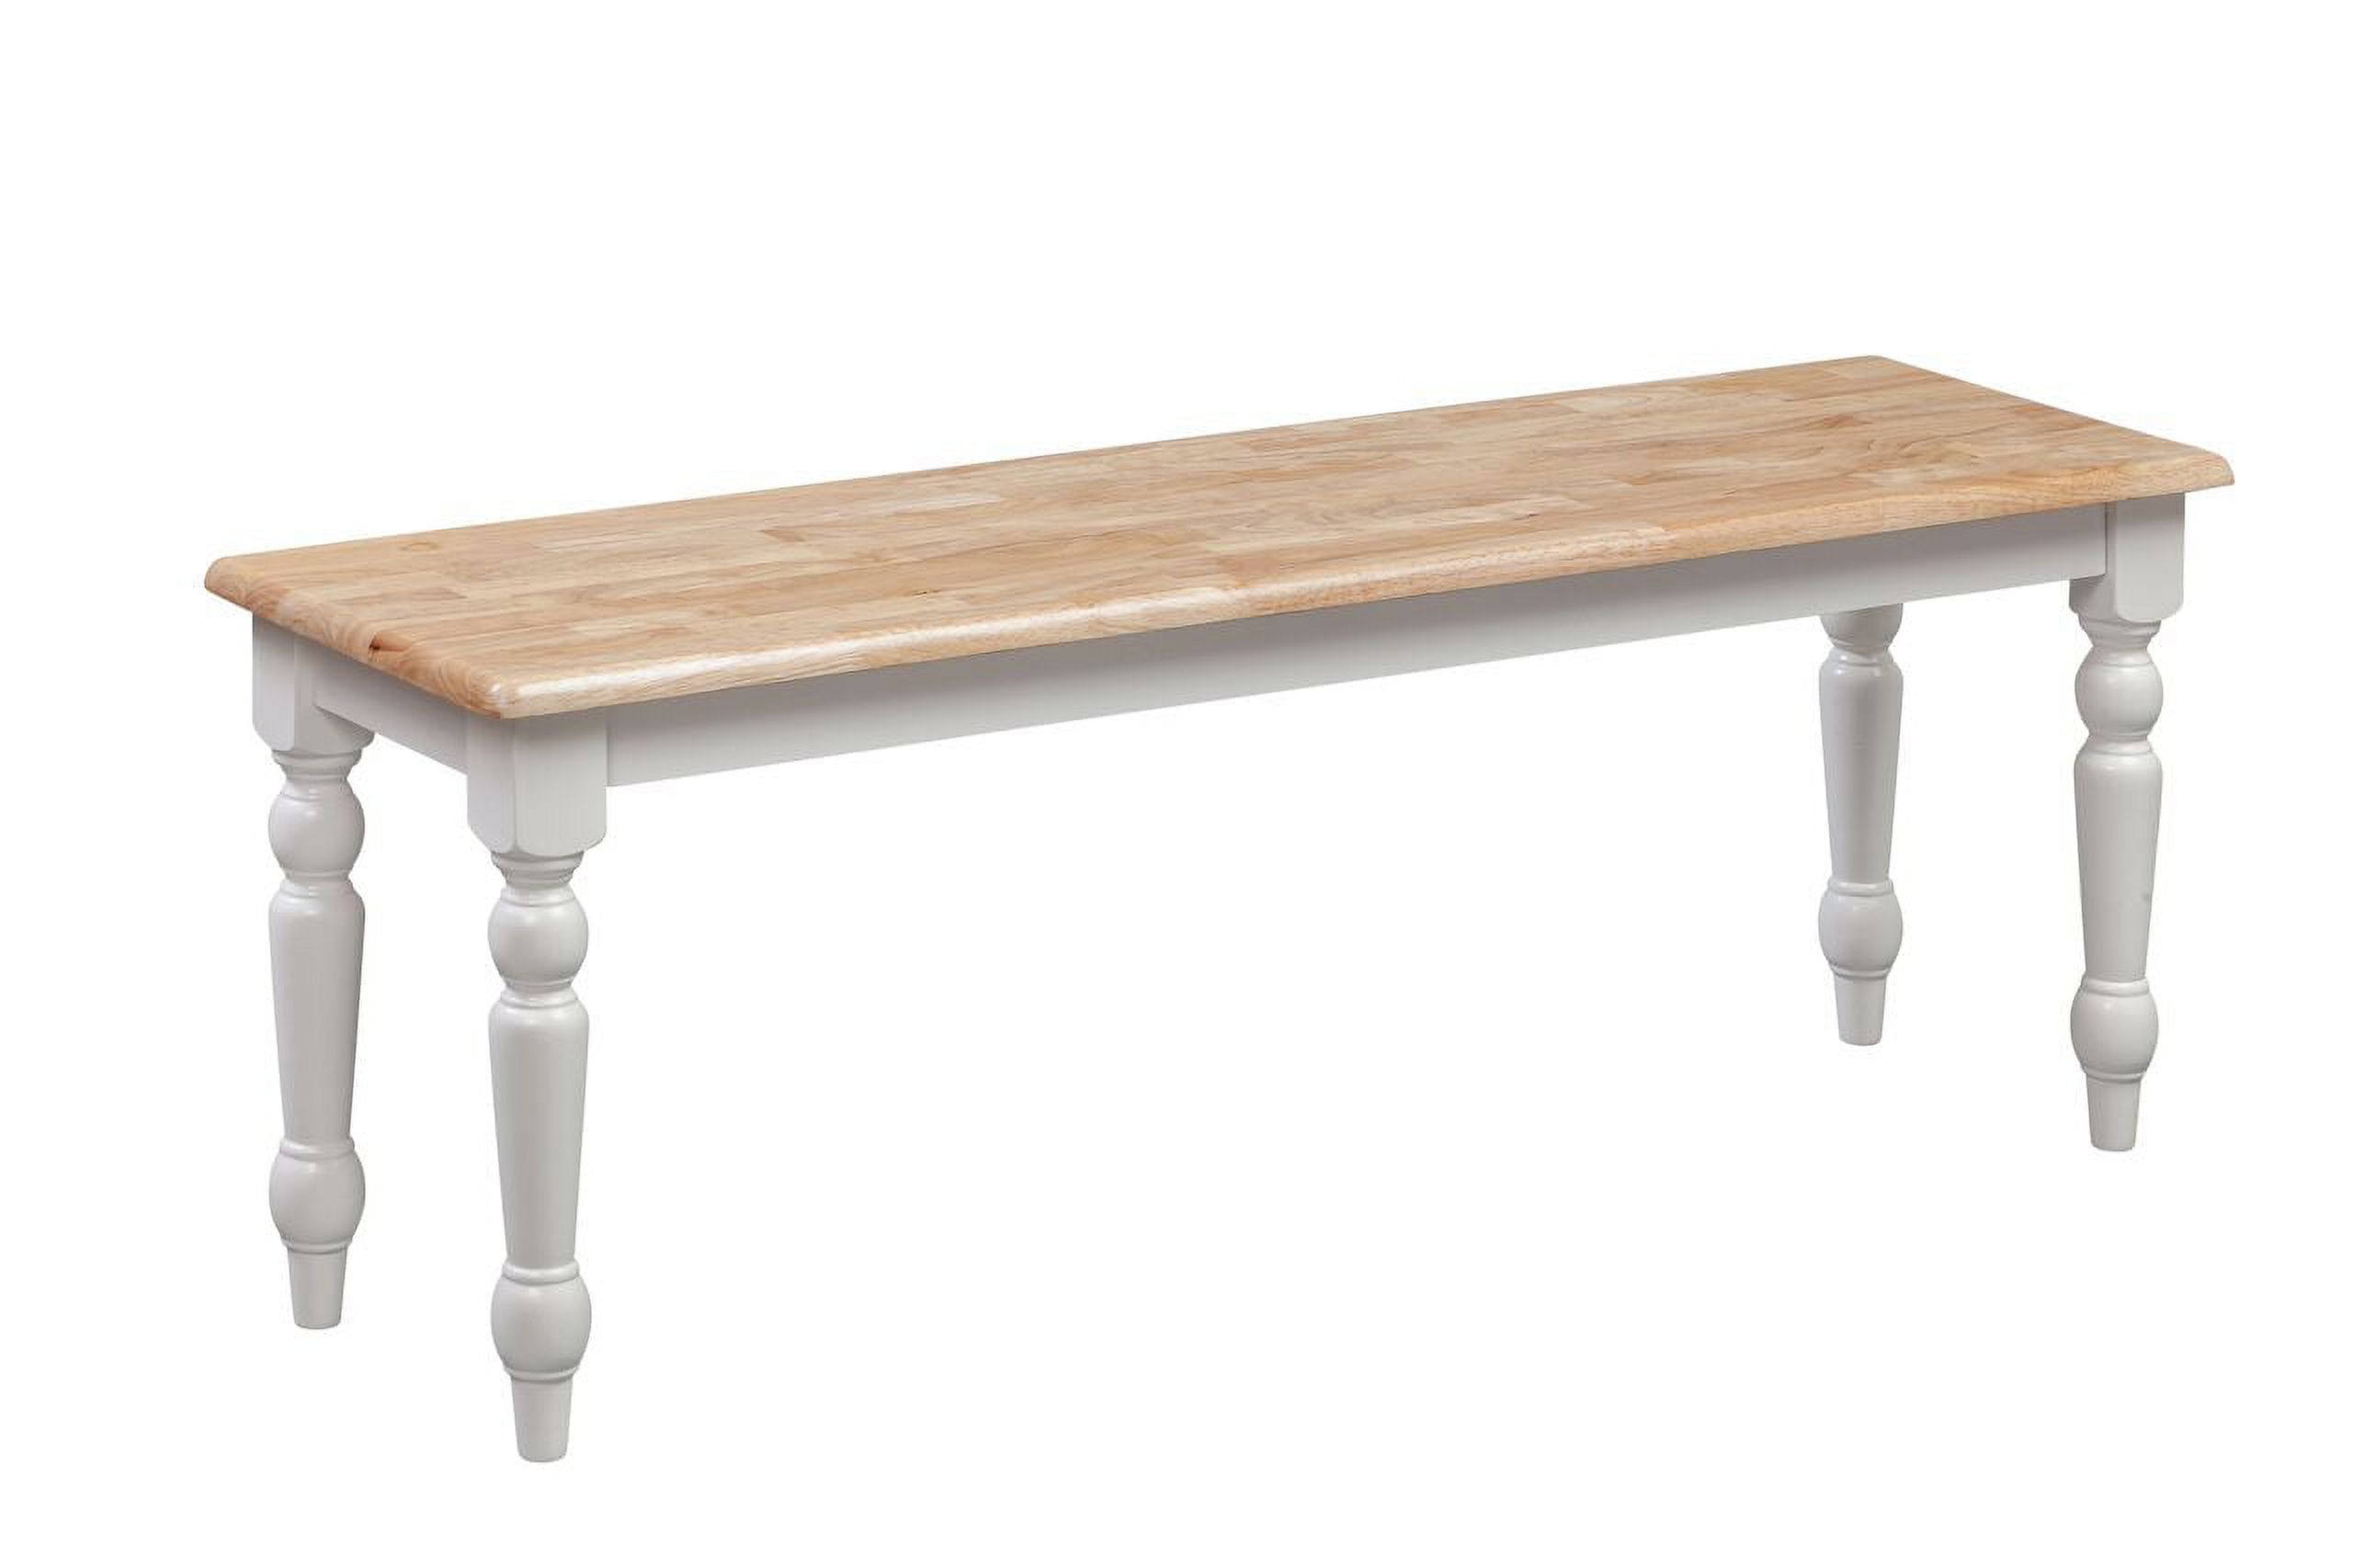 Boraam Farmhouse Backless Wood Bench - White/Natural Two-Tone Finish - image 5 of 5